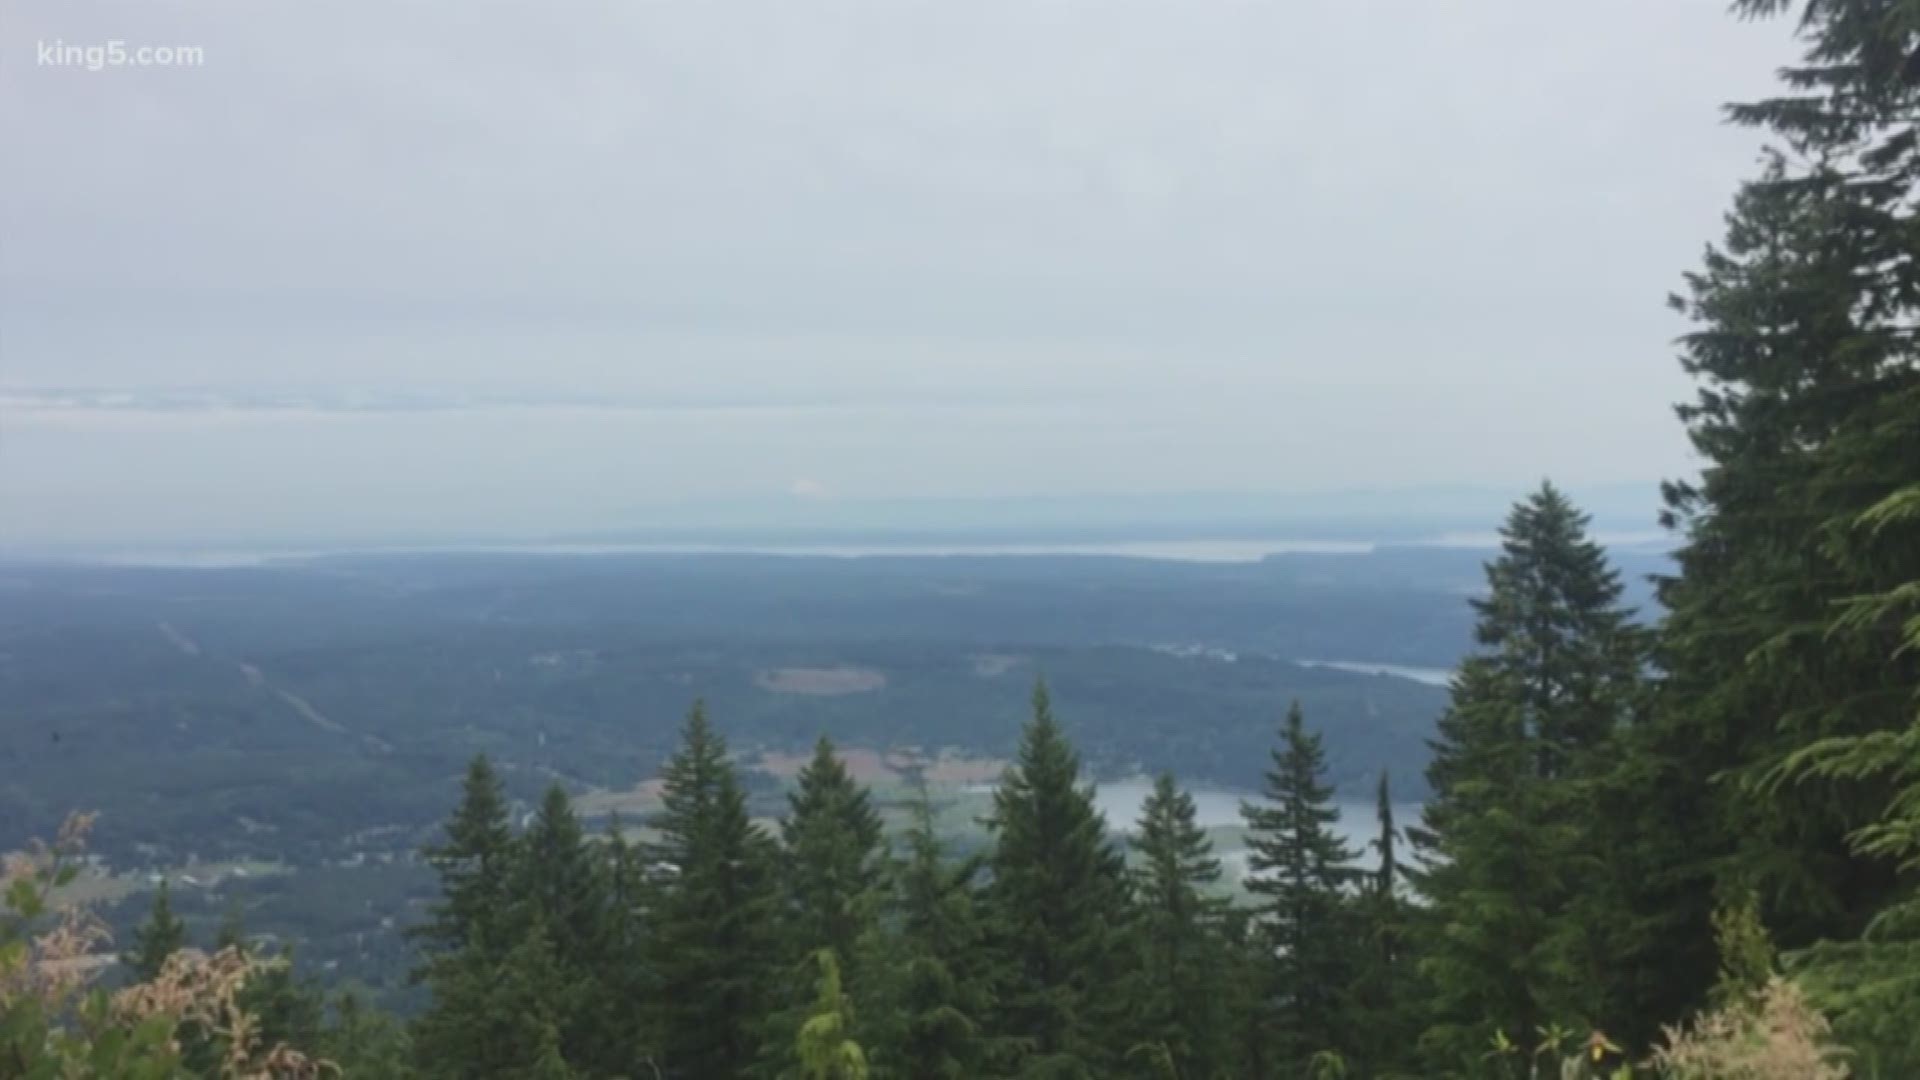 KING 5's Ben Dery checks out a hike at Mount Walker